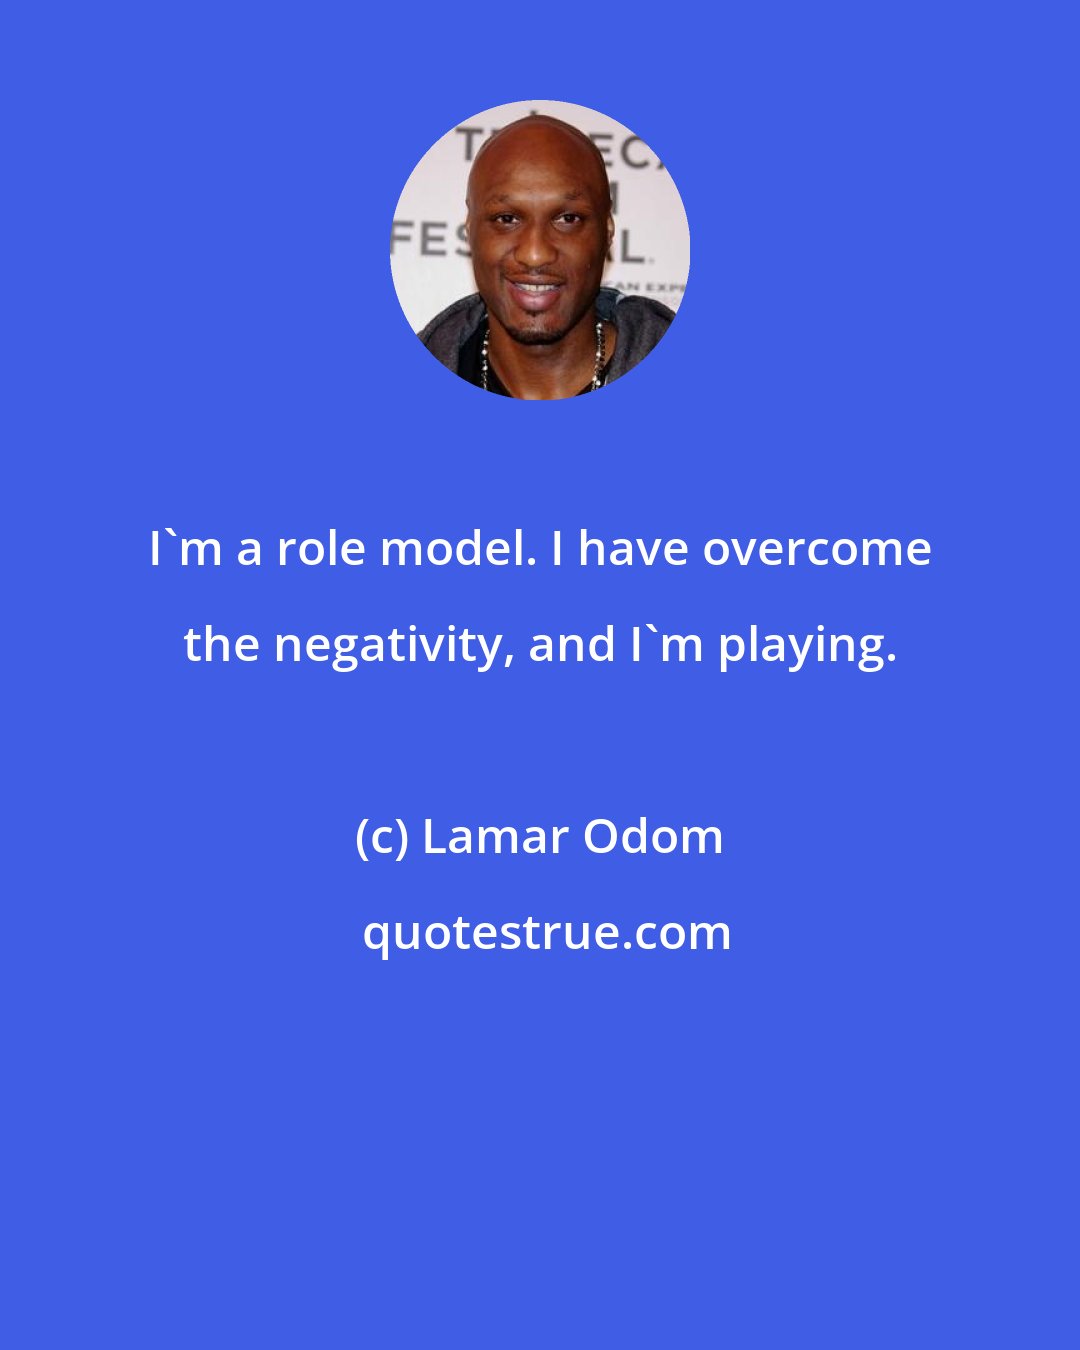 Lamar Odom: I'm a role model. I have overcome the negativity, and I'm playing.